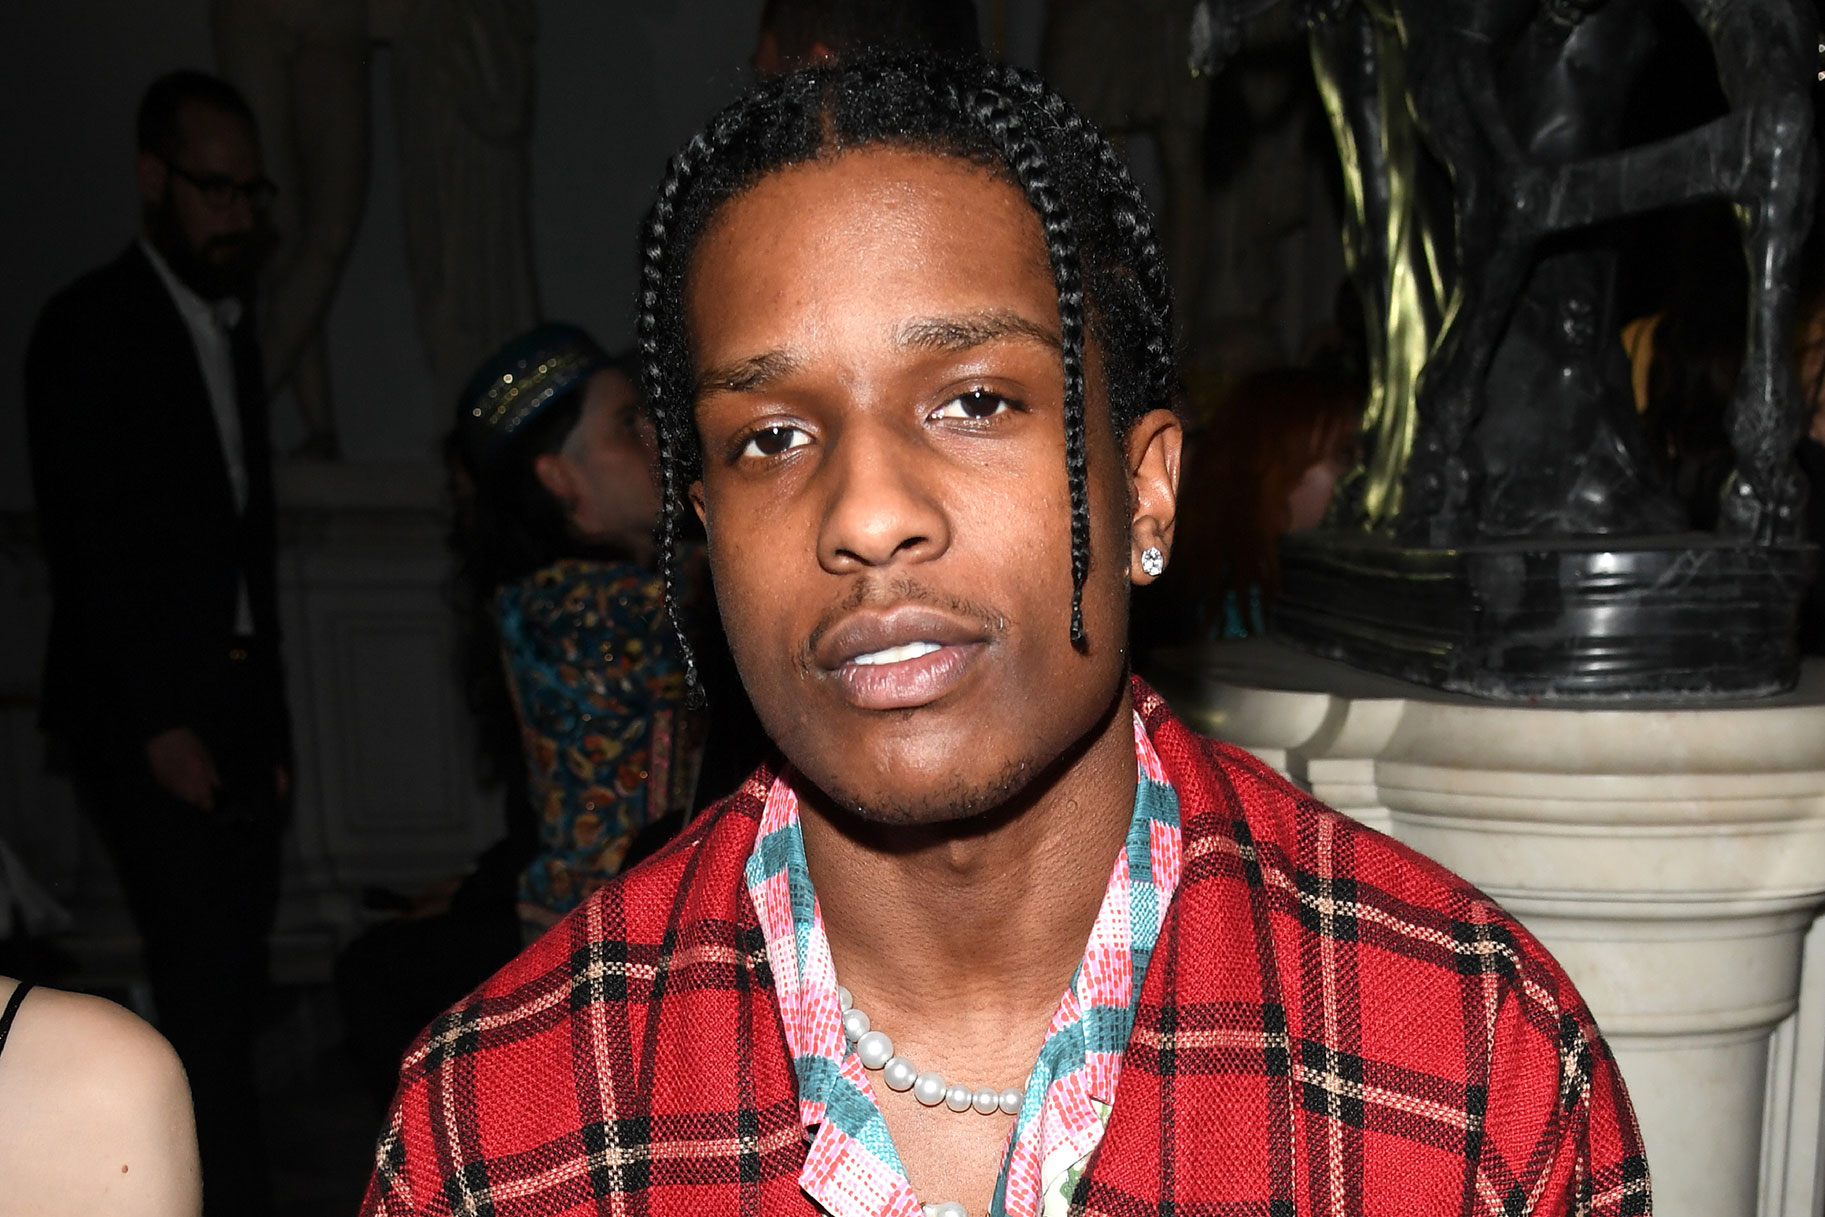 How Long Was Asap In Jail